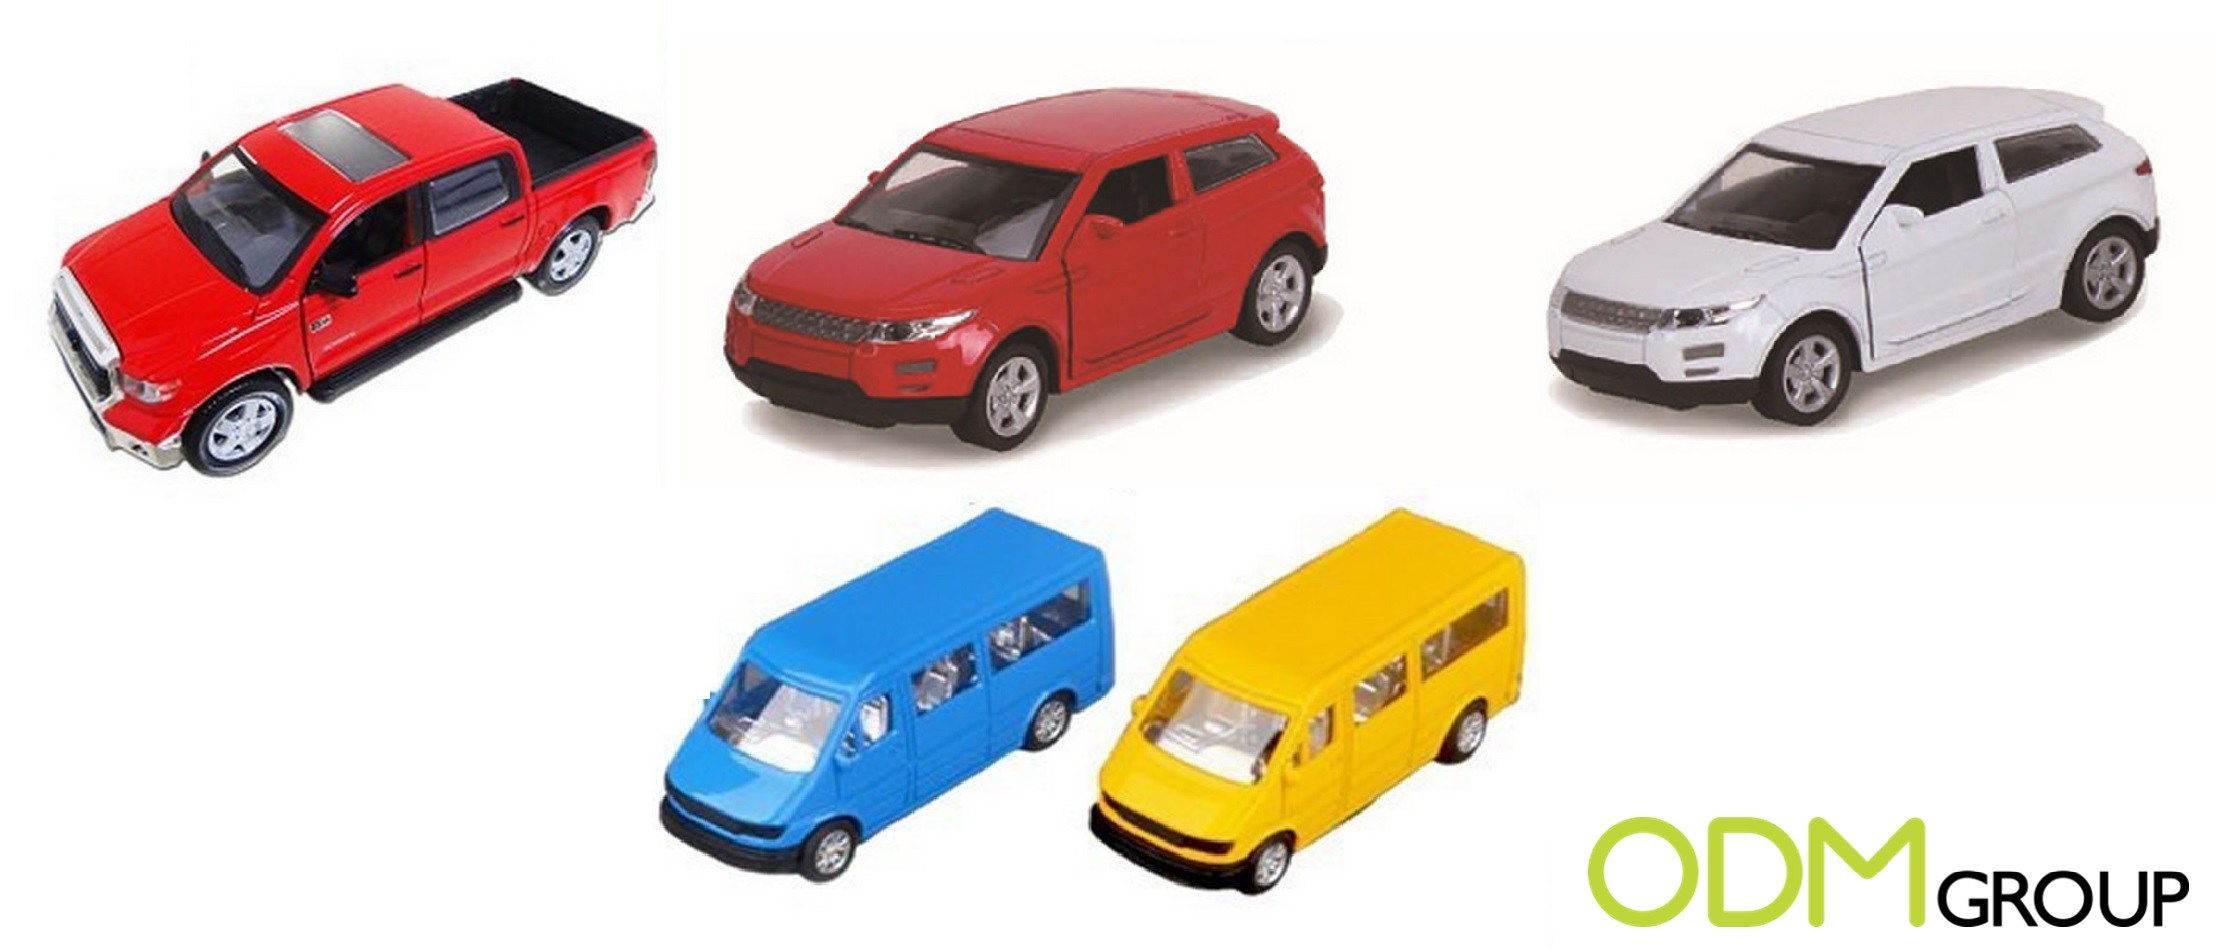 Pull Back Toy Cars as Custom Marketing Gift | TheODMGroup Blog